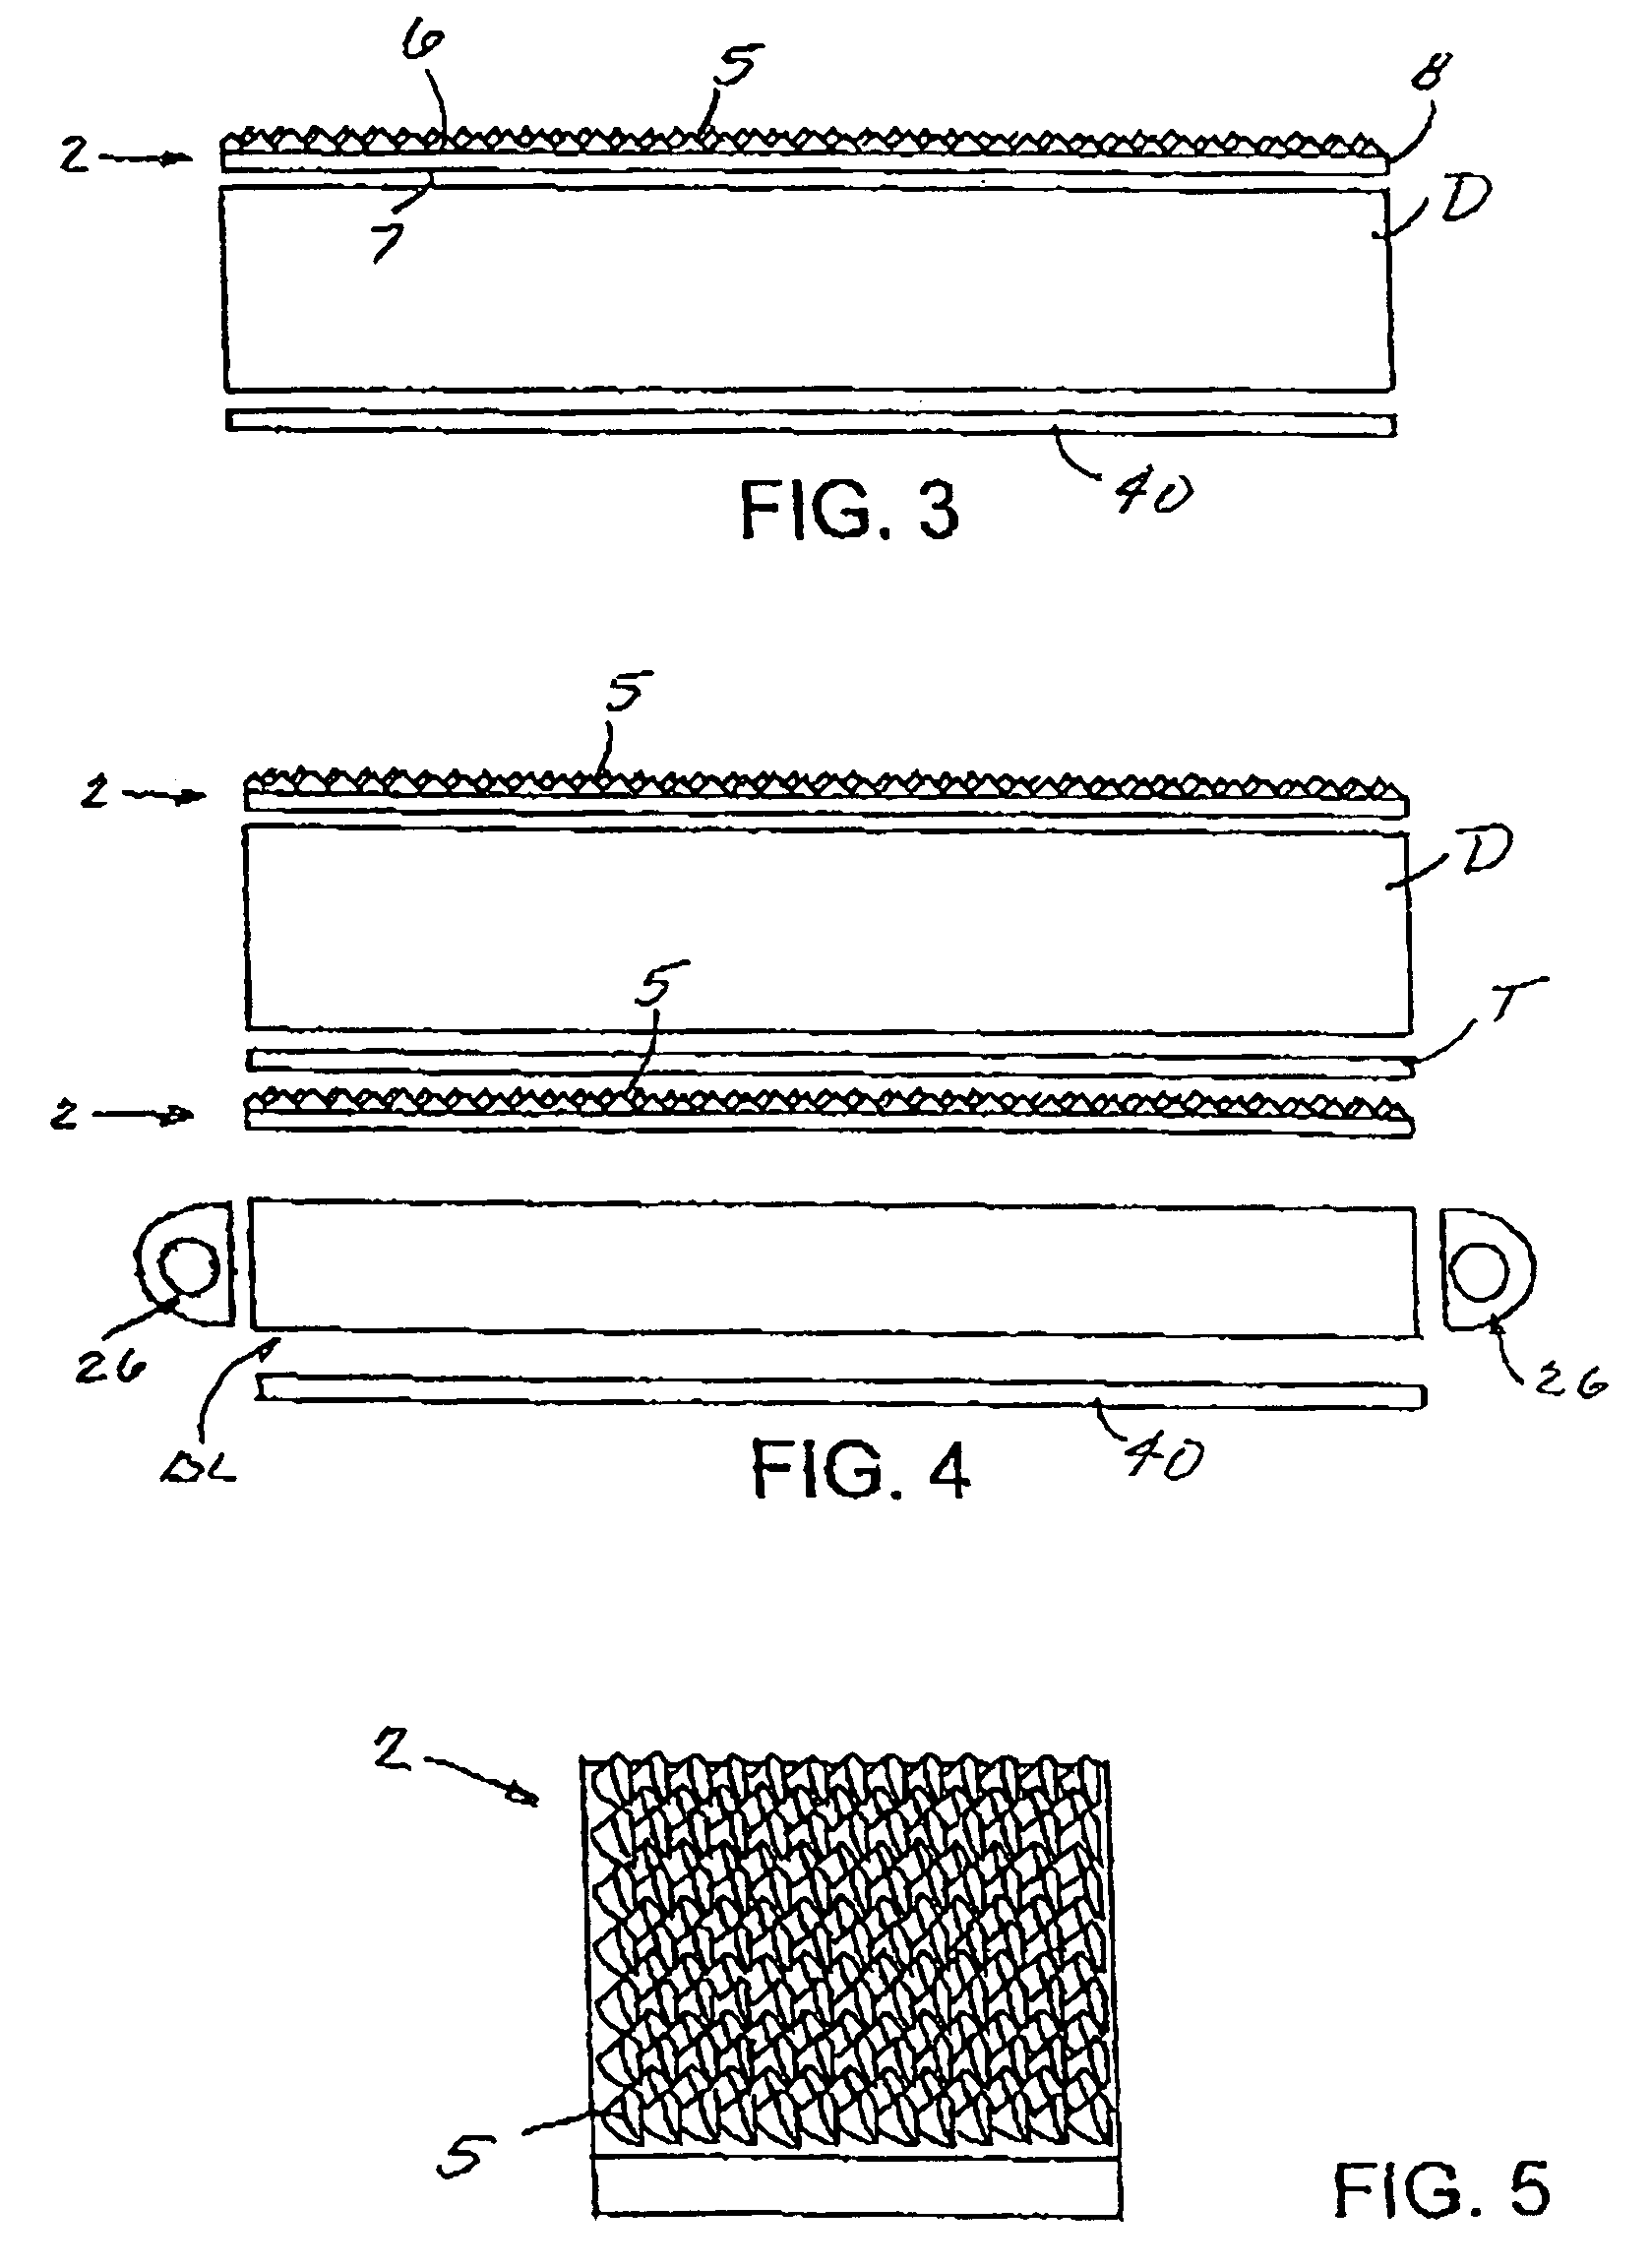 Smooth compliant belt for use with molding roller